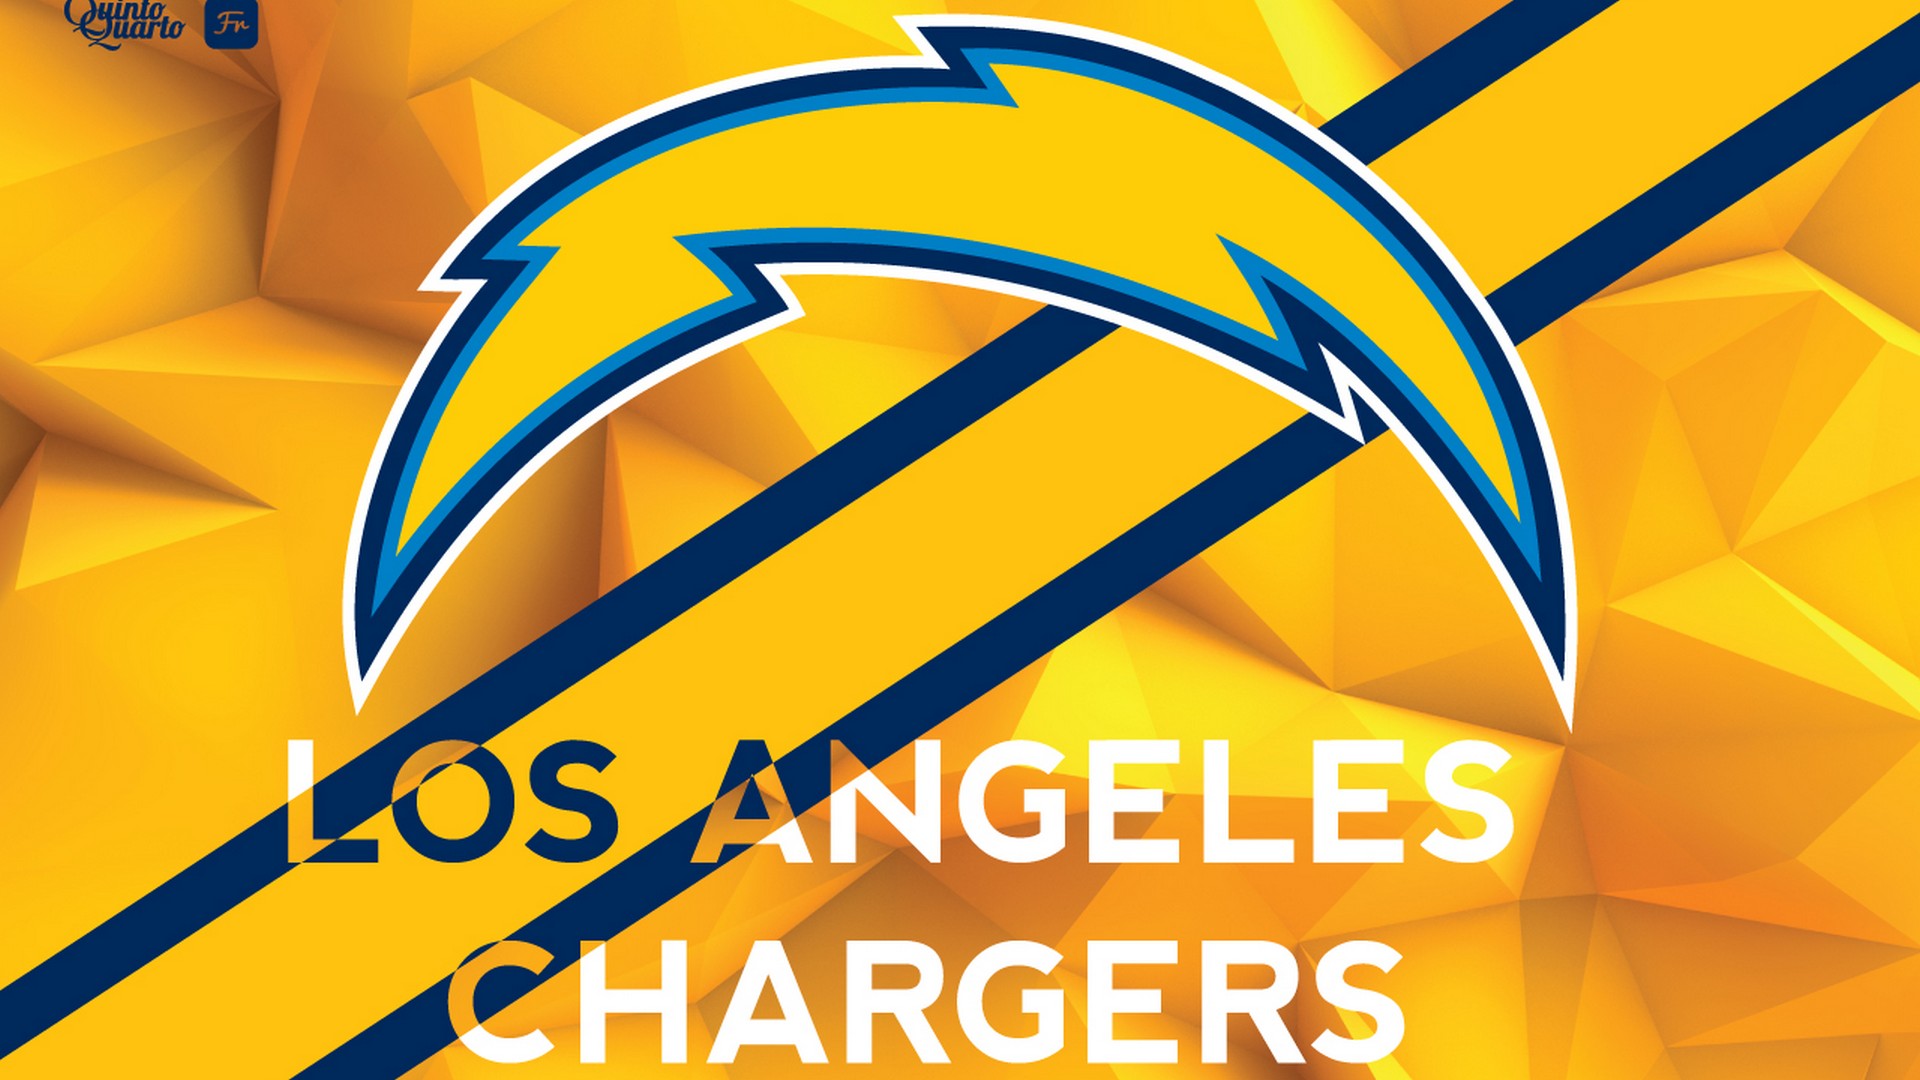 Los Angeles Chargers Wallpaper For Mac with resolution 1920x1080 pixel. You can make this wallpaper for your Mac or Windows Desktop Background, iPhone, Android or Tablet and another Smartphone device